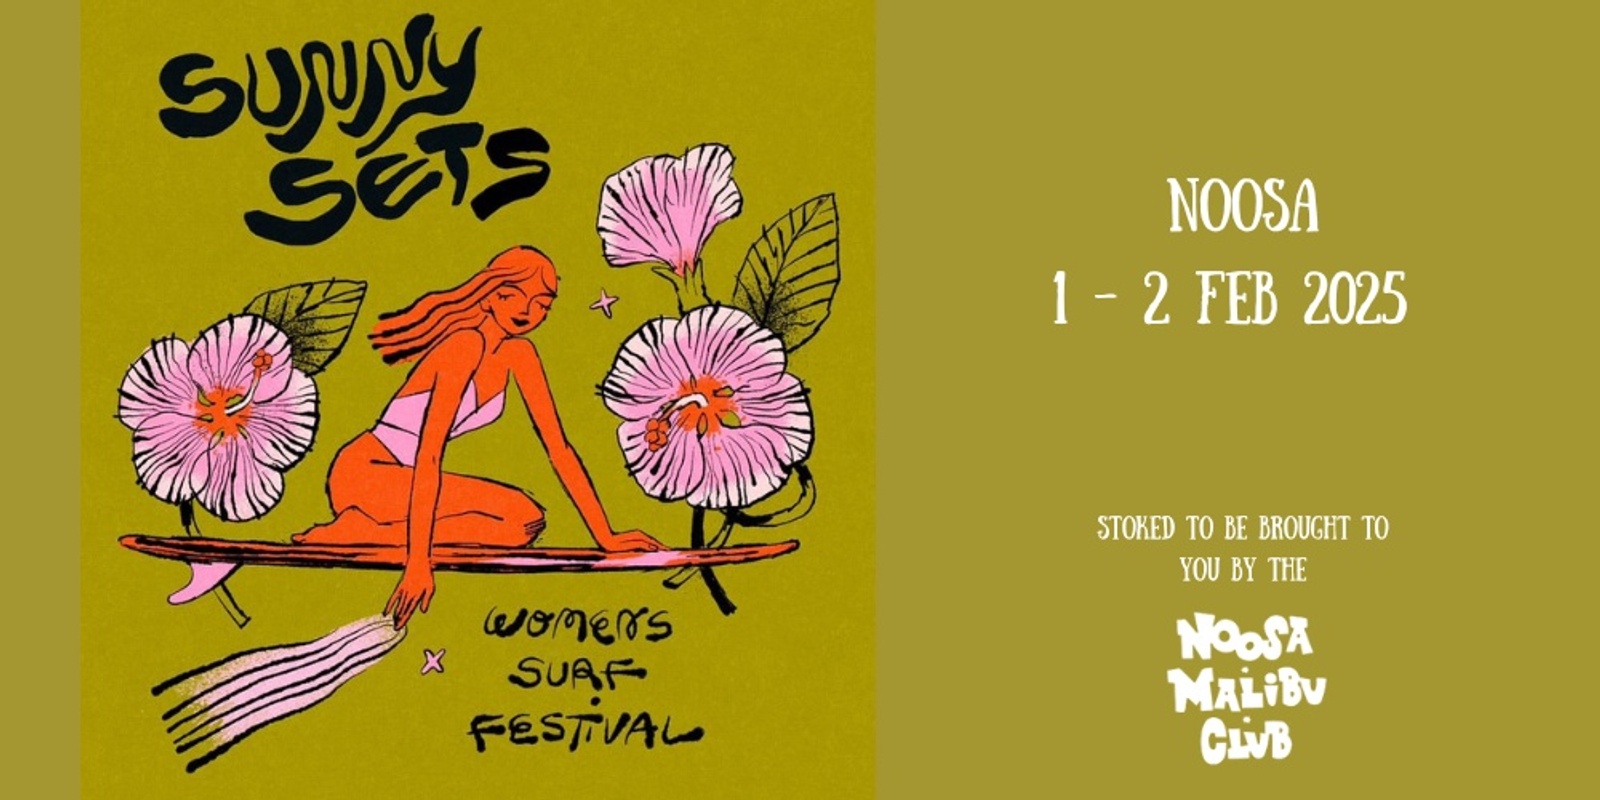 Banner image for Sunny Sets Women's Surf Contest | Noosa